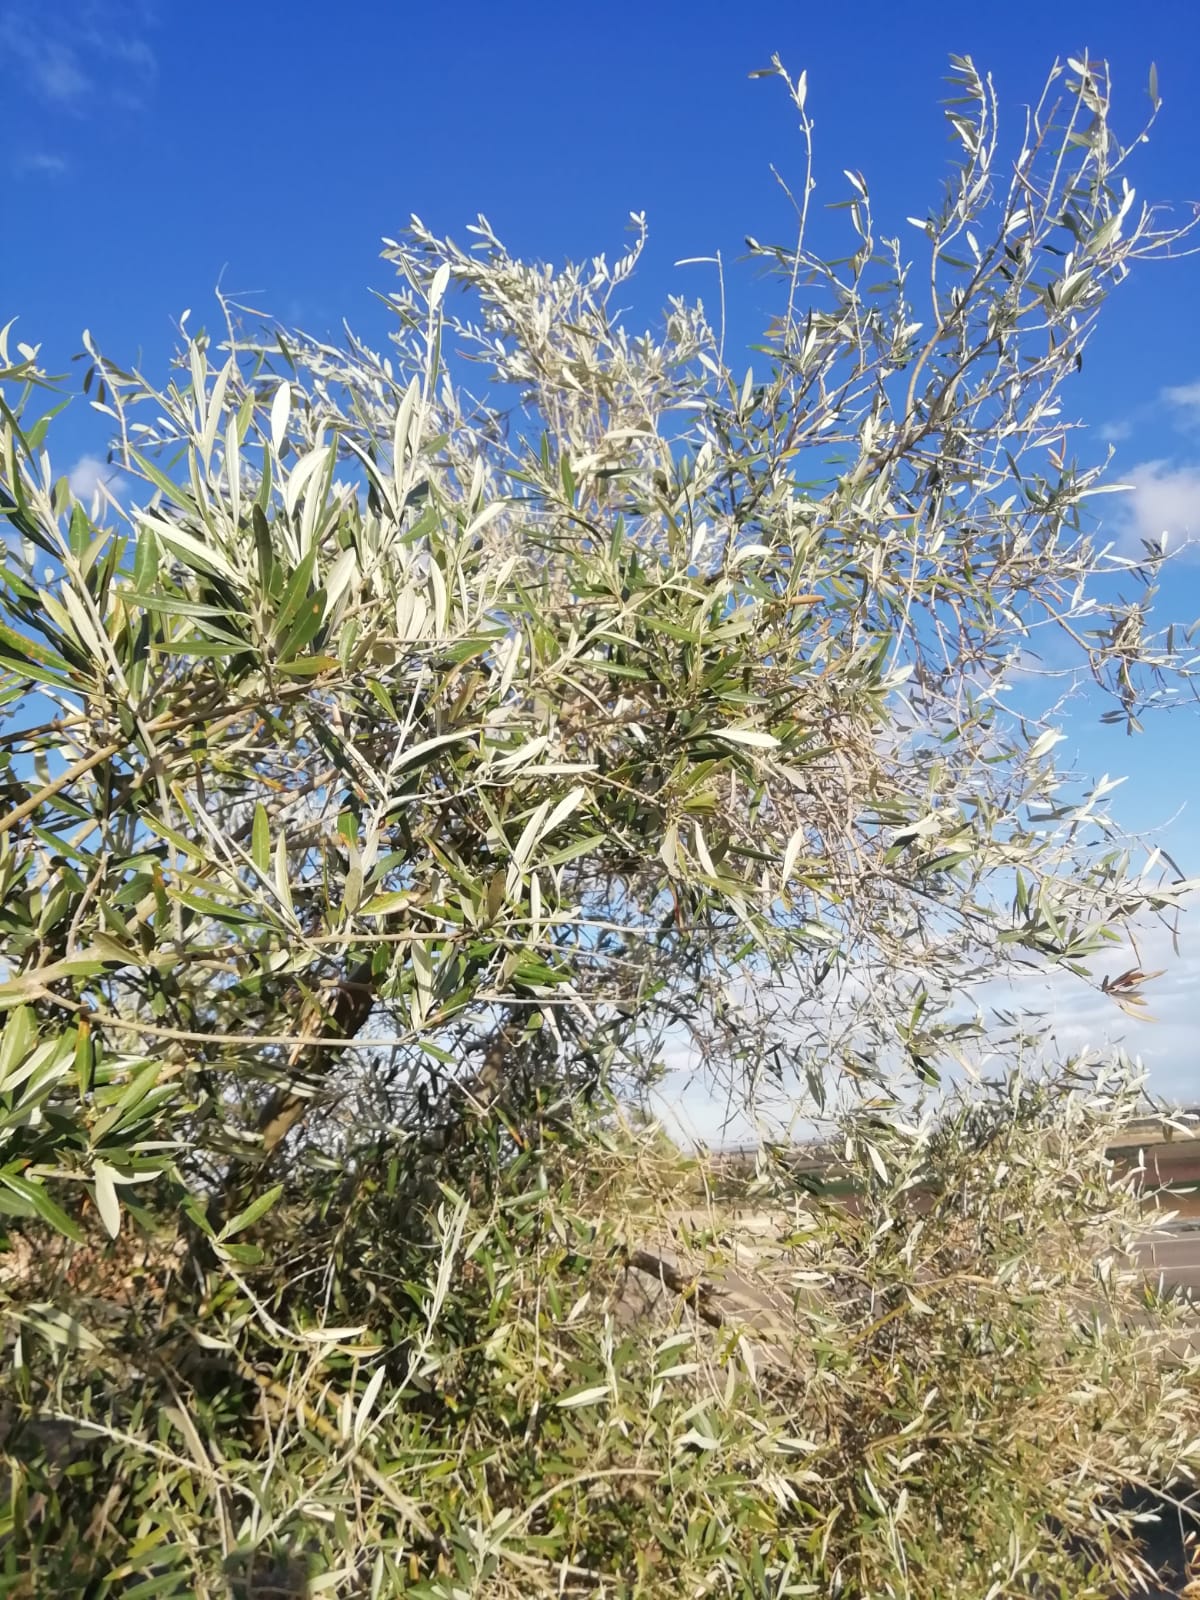 olive grove affected by snowfall. ESAO olive grove management